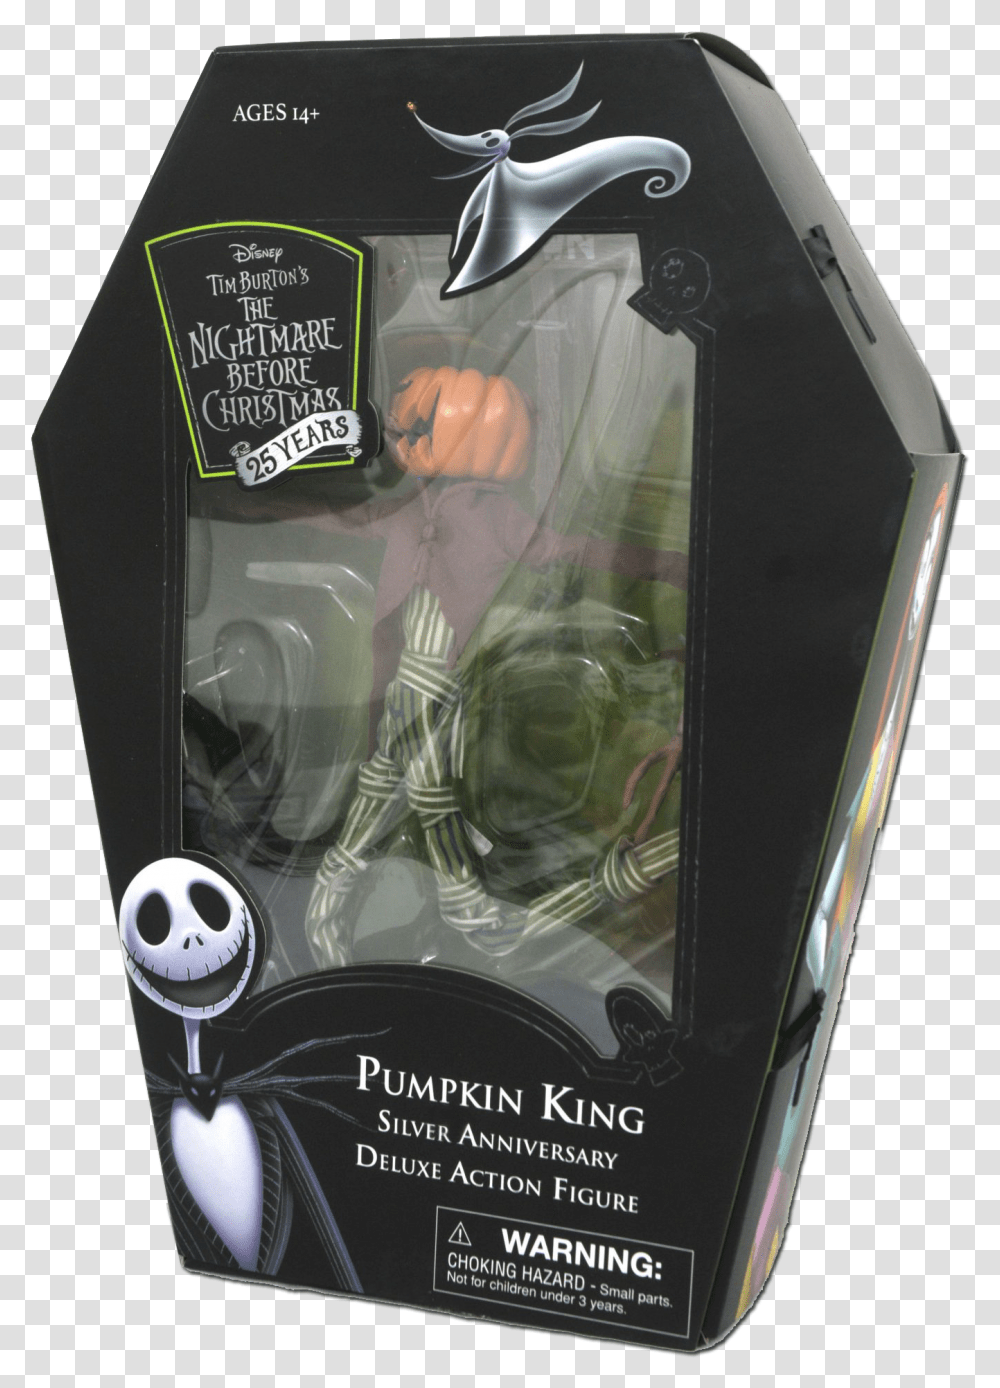 Pumpkinkingbox - Action Figure Junkies The Nightmare Before Christmas, Mobile Phone, Electronics, Text, Poster Transparent Png